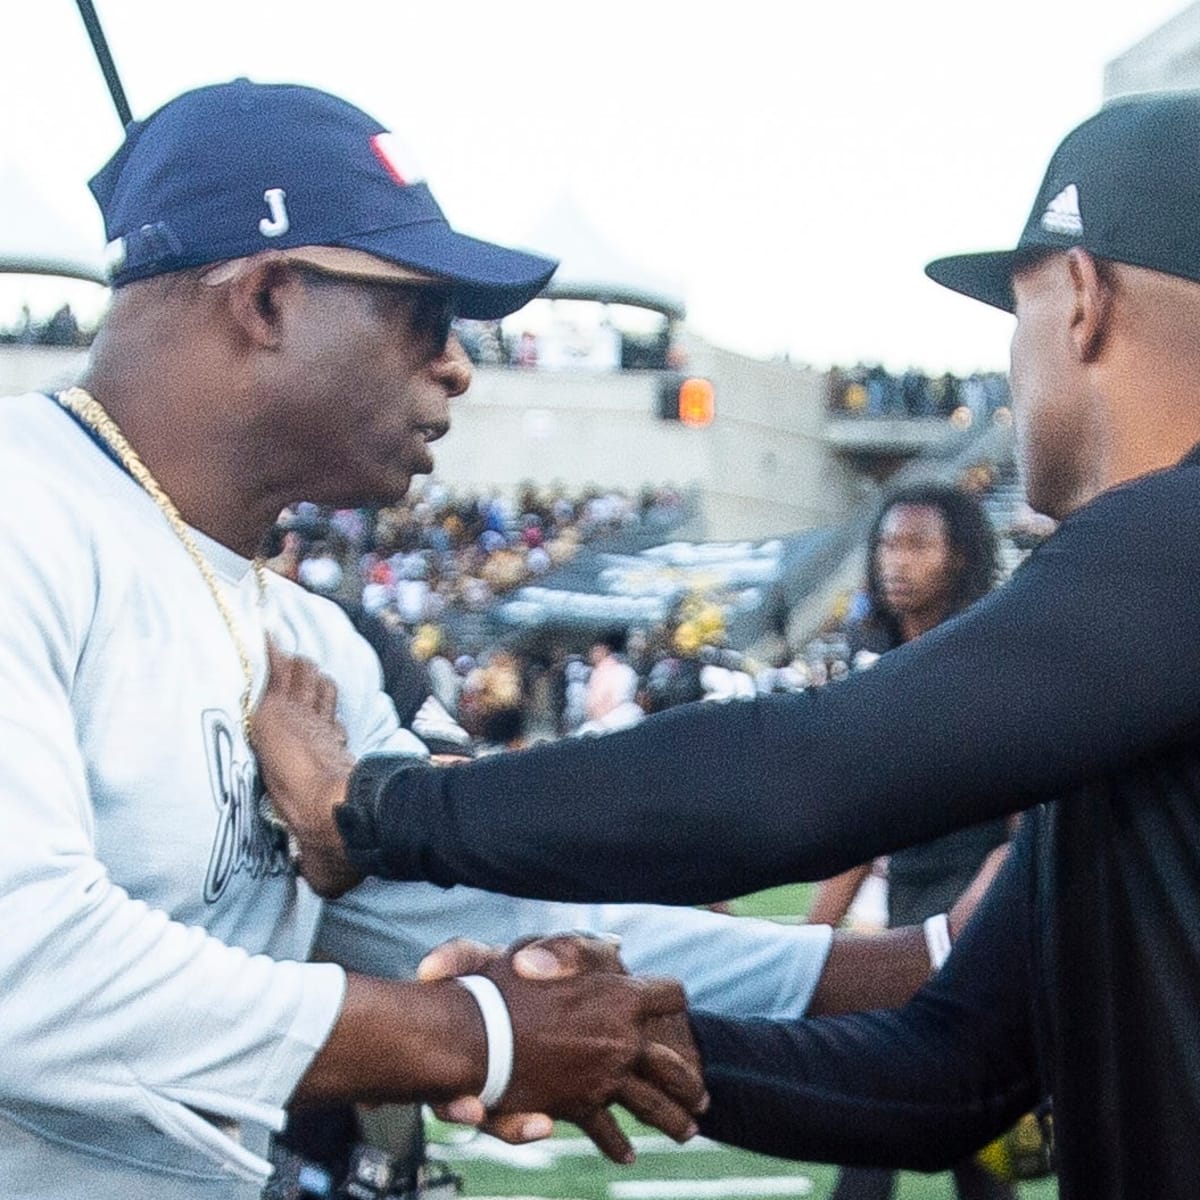 35 Years After Historic Draft Pick, Deion Sanders Linked With Yankees  Return Amidst Miraculous Playoff Chase - EssentiallySports